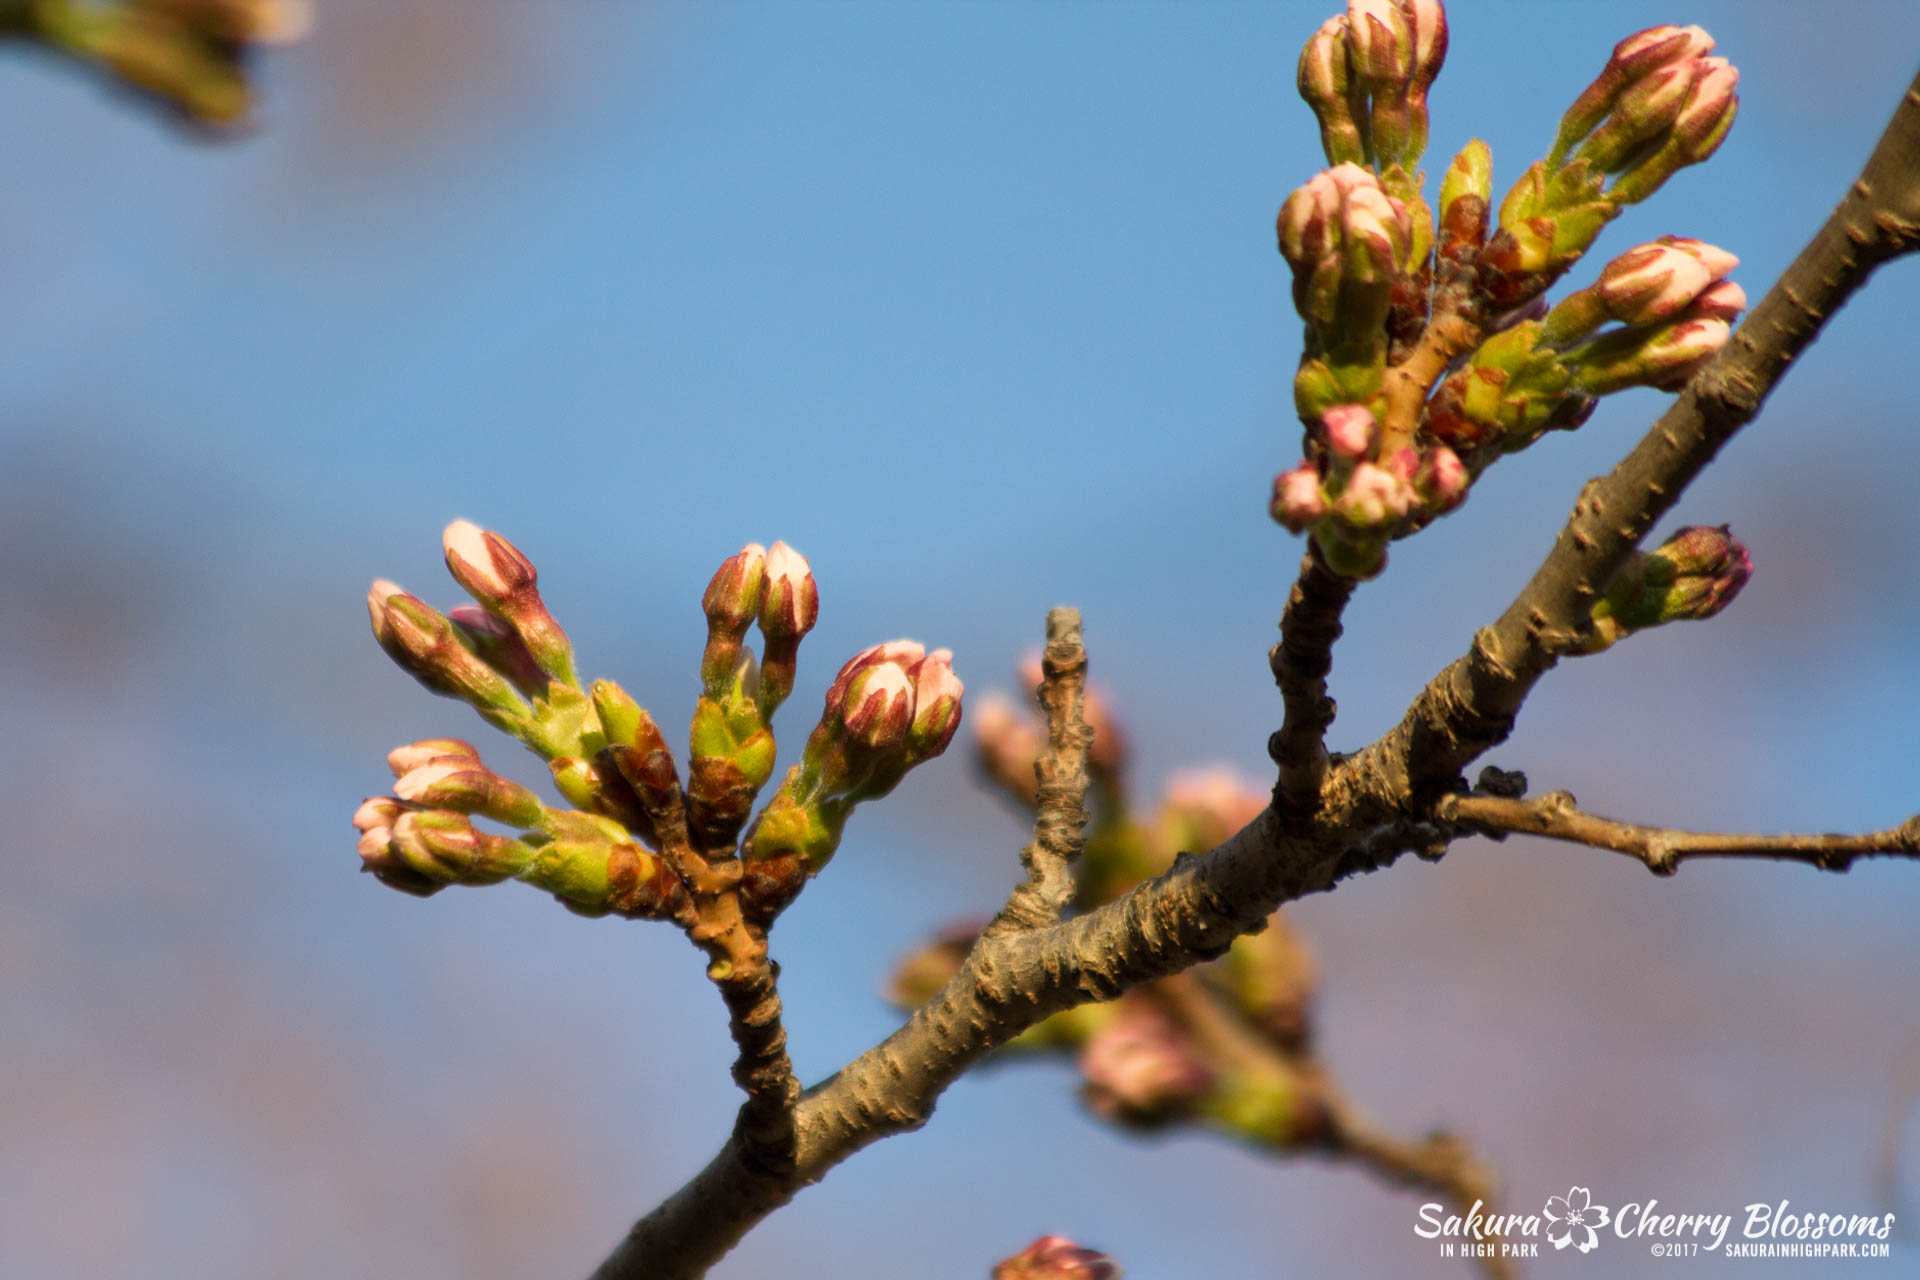 Sakura-in-High-Park-April-17-2017-florets-are-emerging-from-the-buds-throughout-the-park-83.jpg